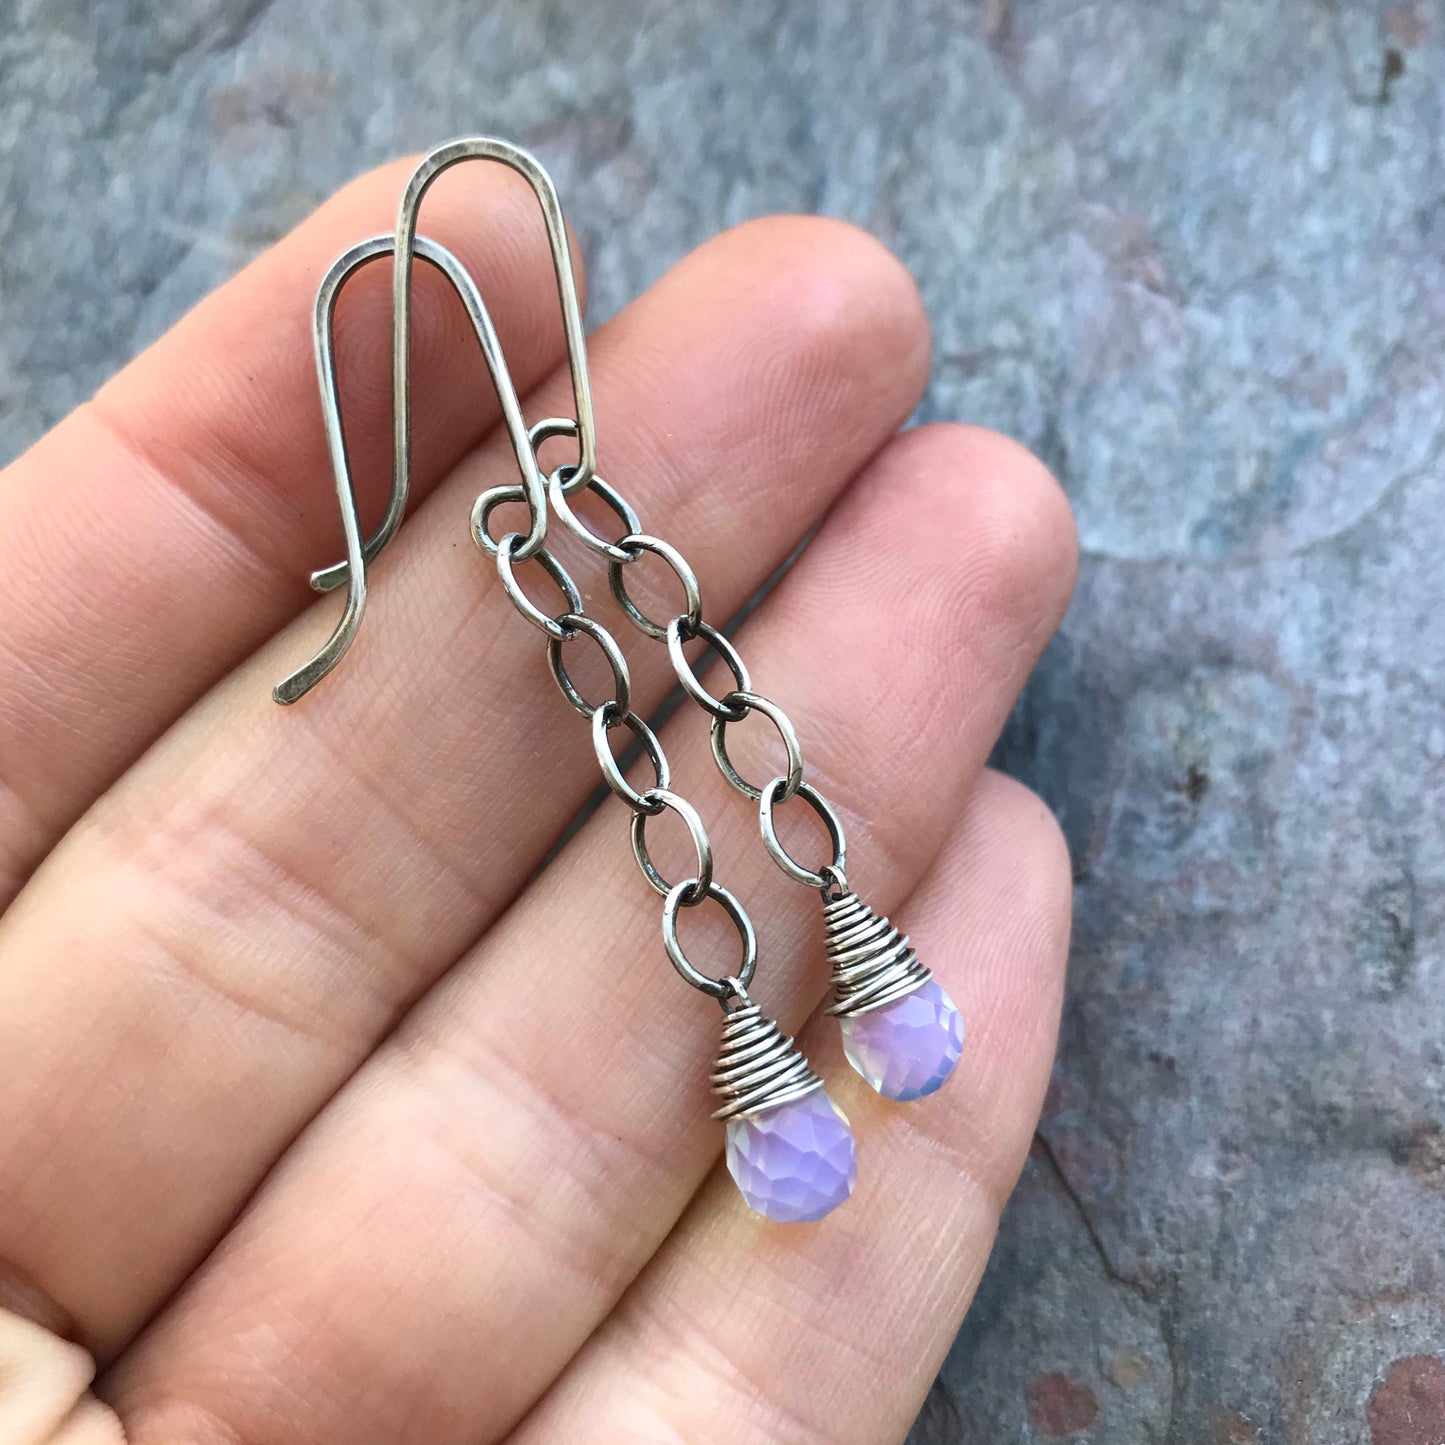 Opalite Sterling Silver Earrings - Faceted Opalite Briolettes on Sterling Silver Chains and Handmade Earwires